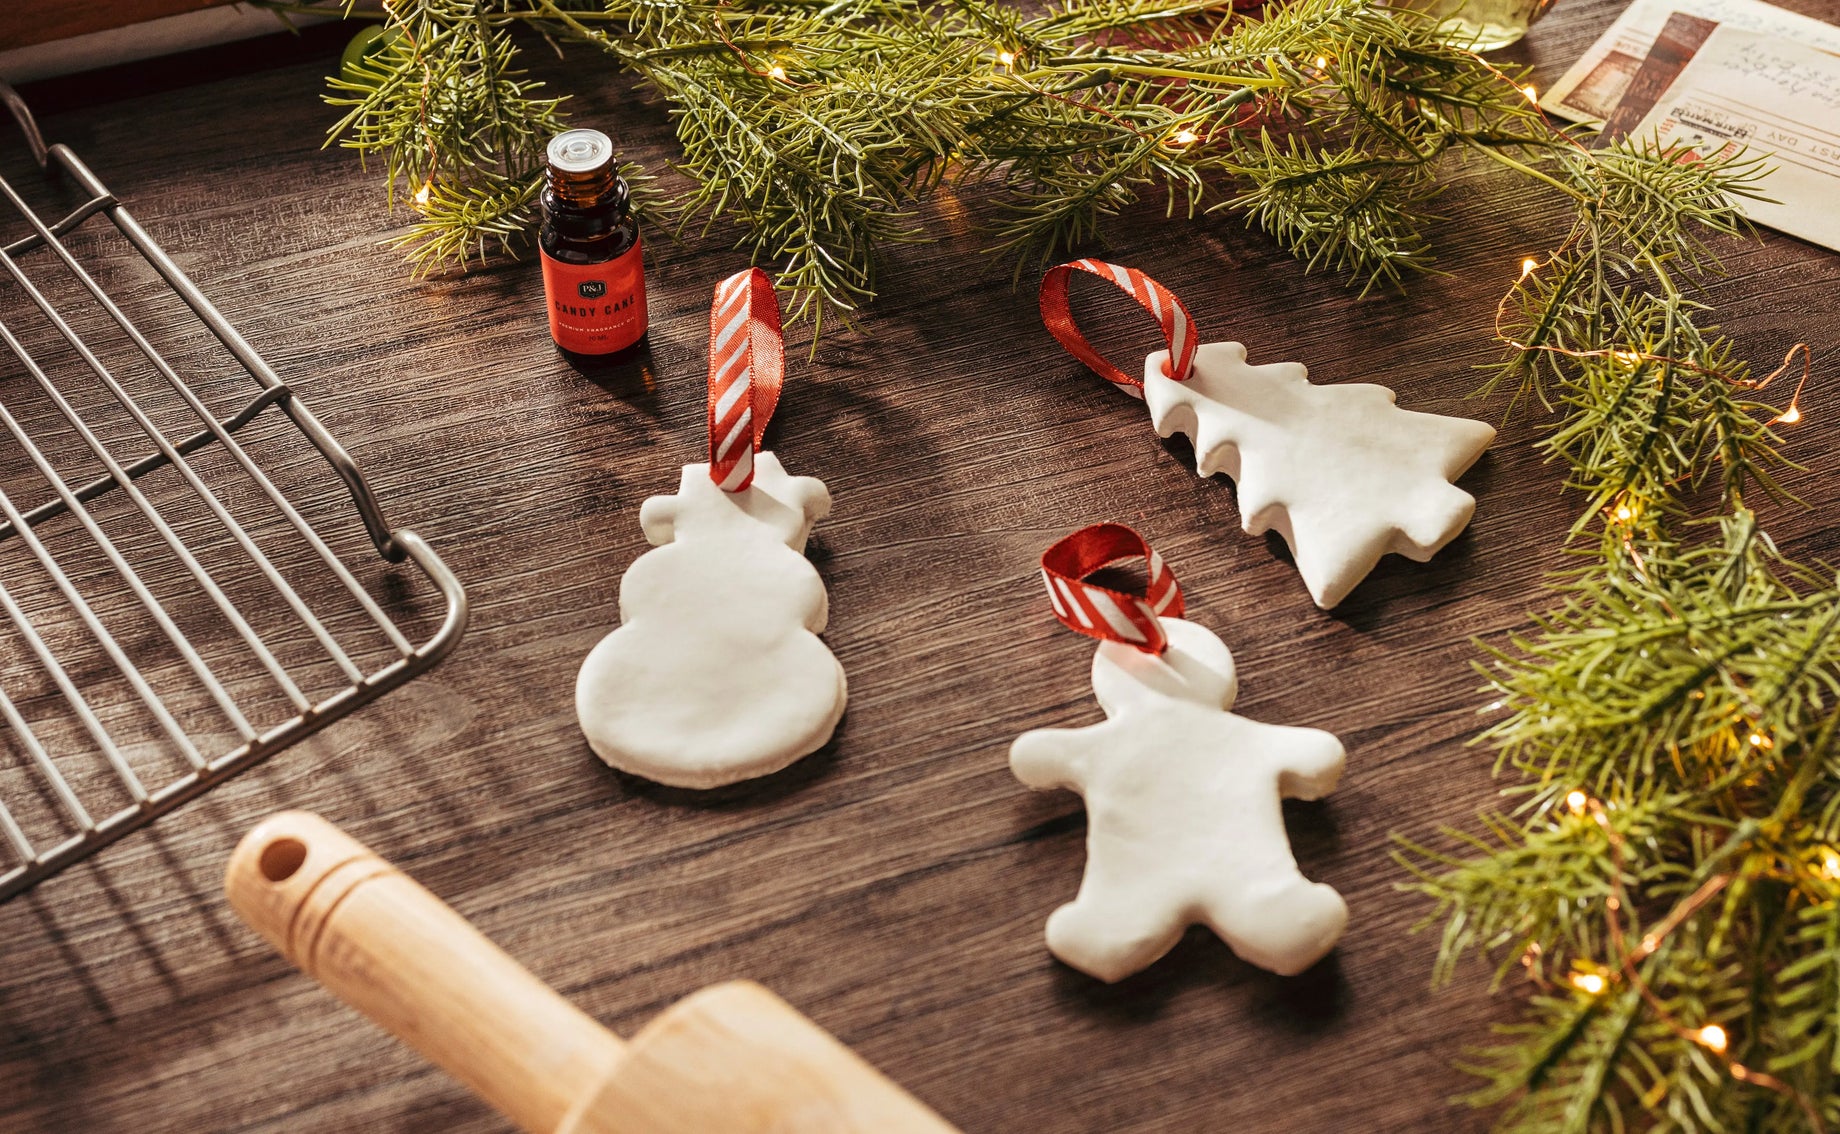 DIY-Christmas-Ornaments-with-the-Sweet-Scent-of-Candy-Canes